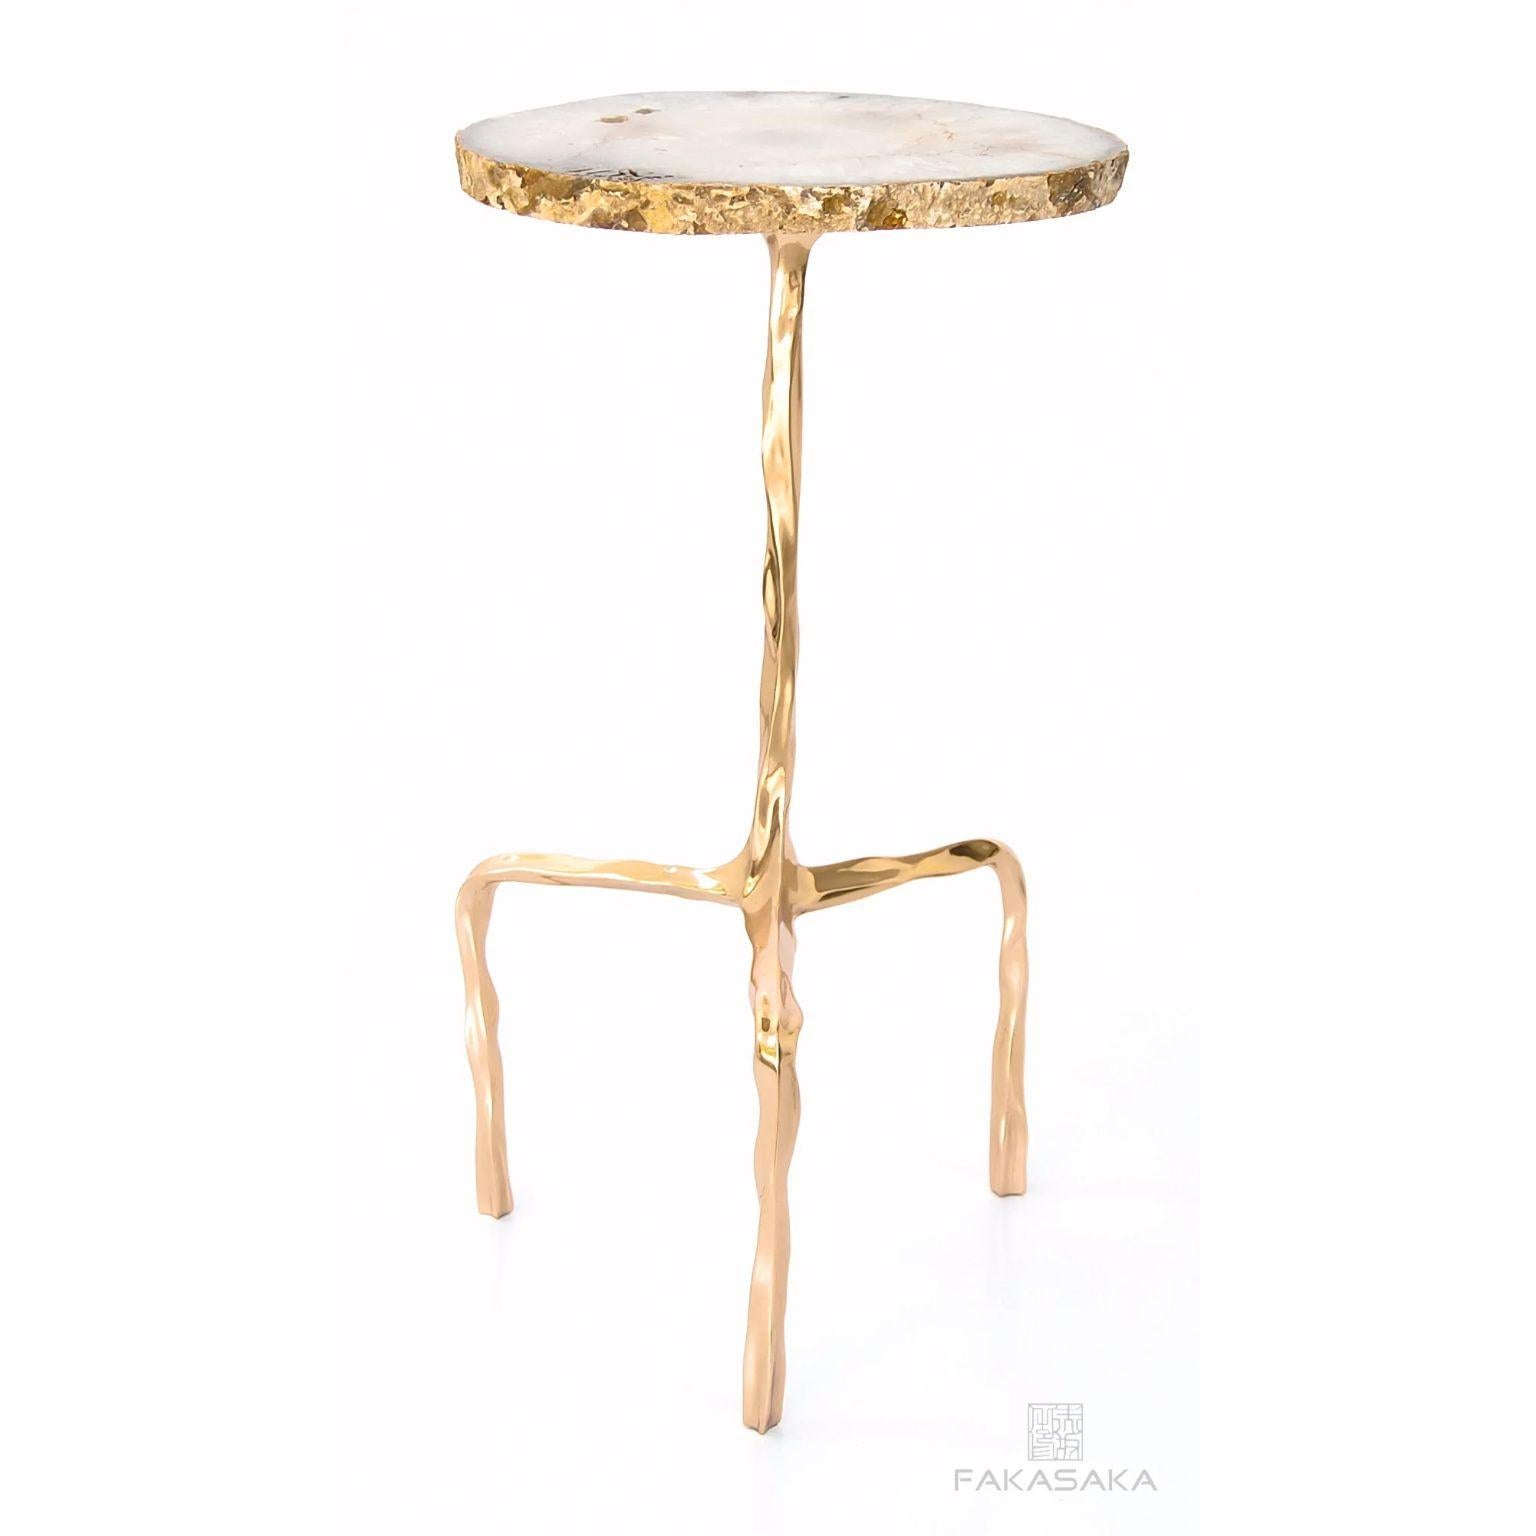 Brazilian Aretha Drink Table with Agate Top by Fakasaka Design For Sale